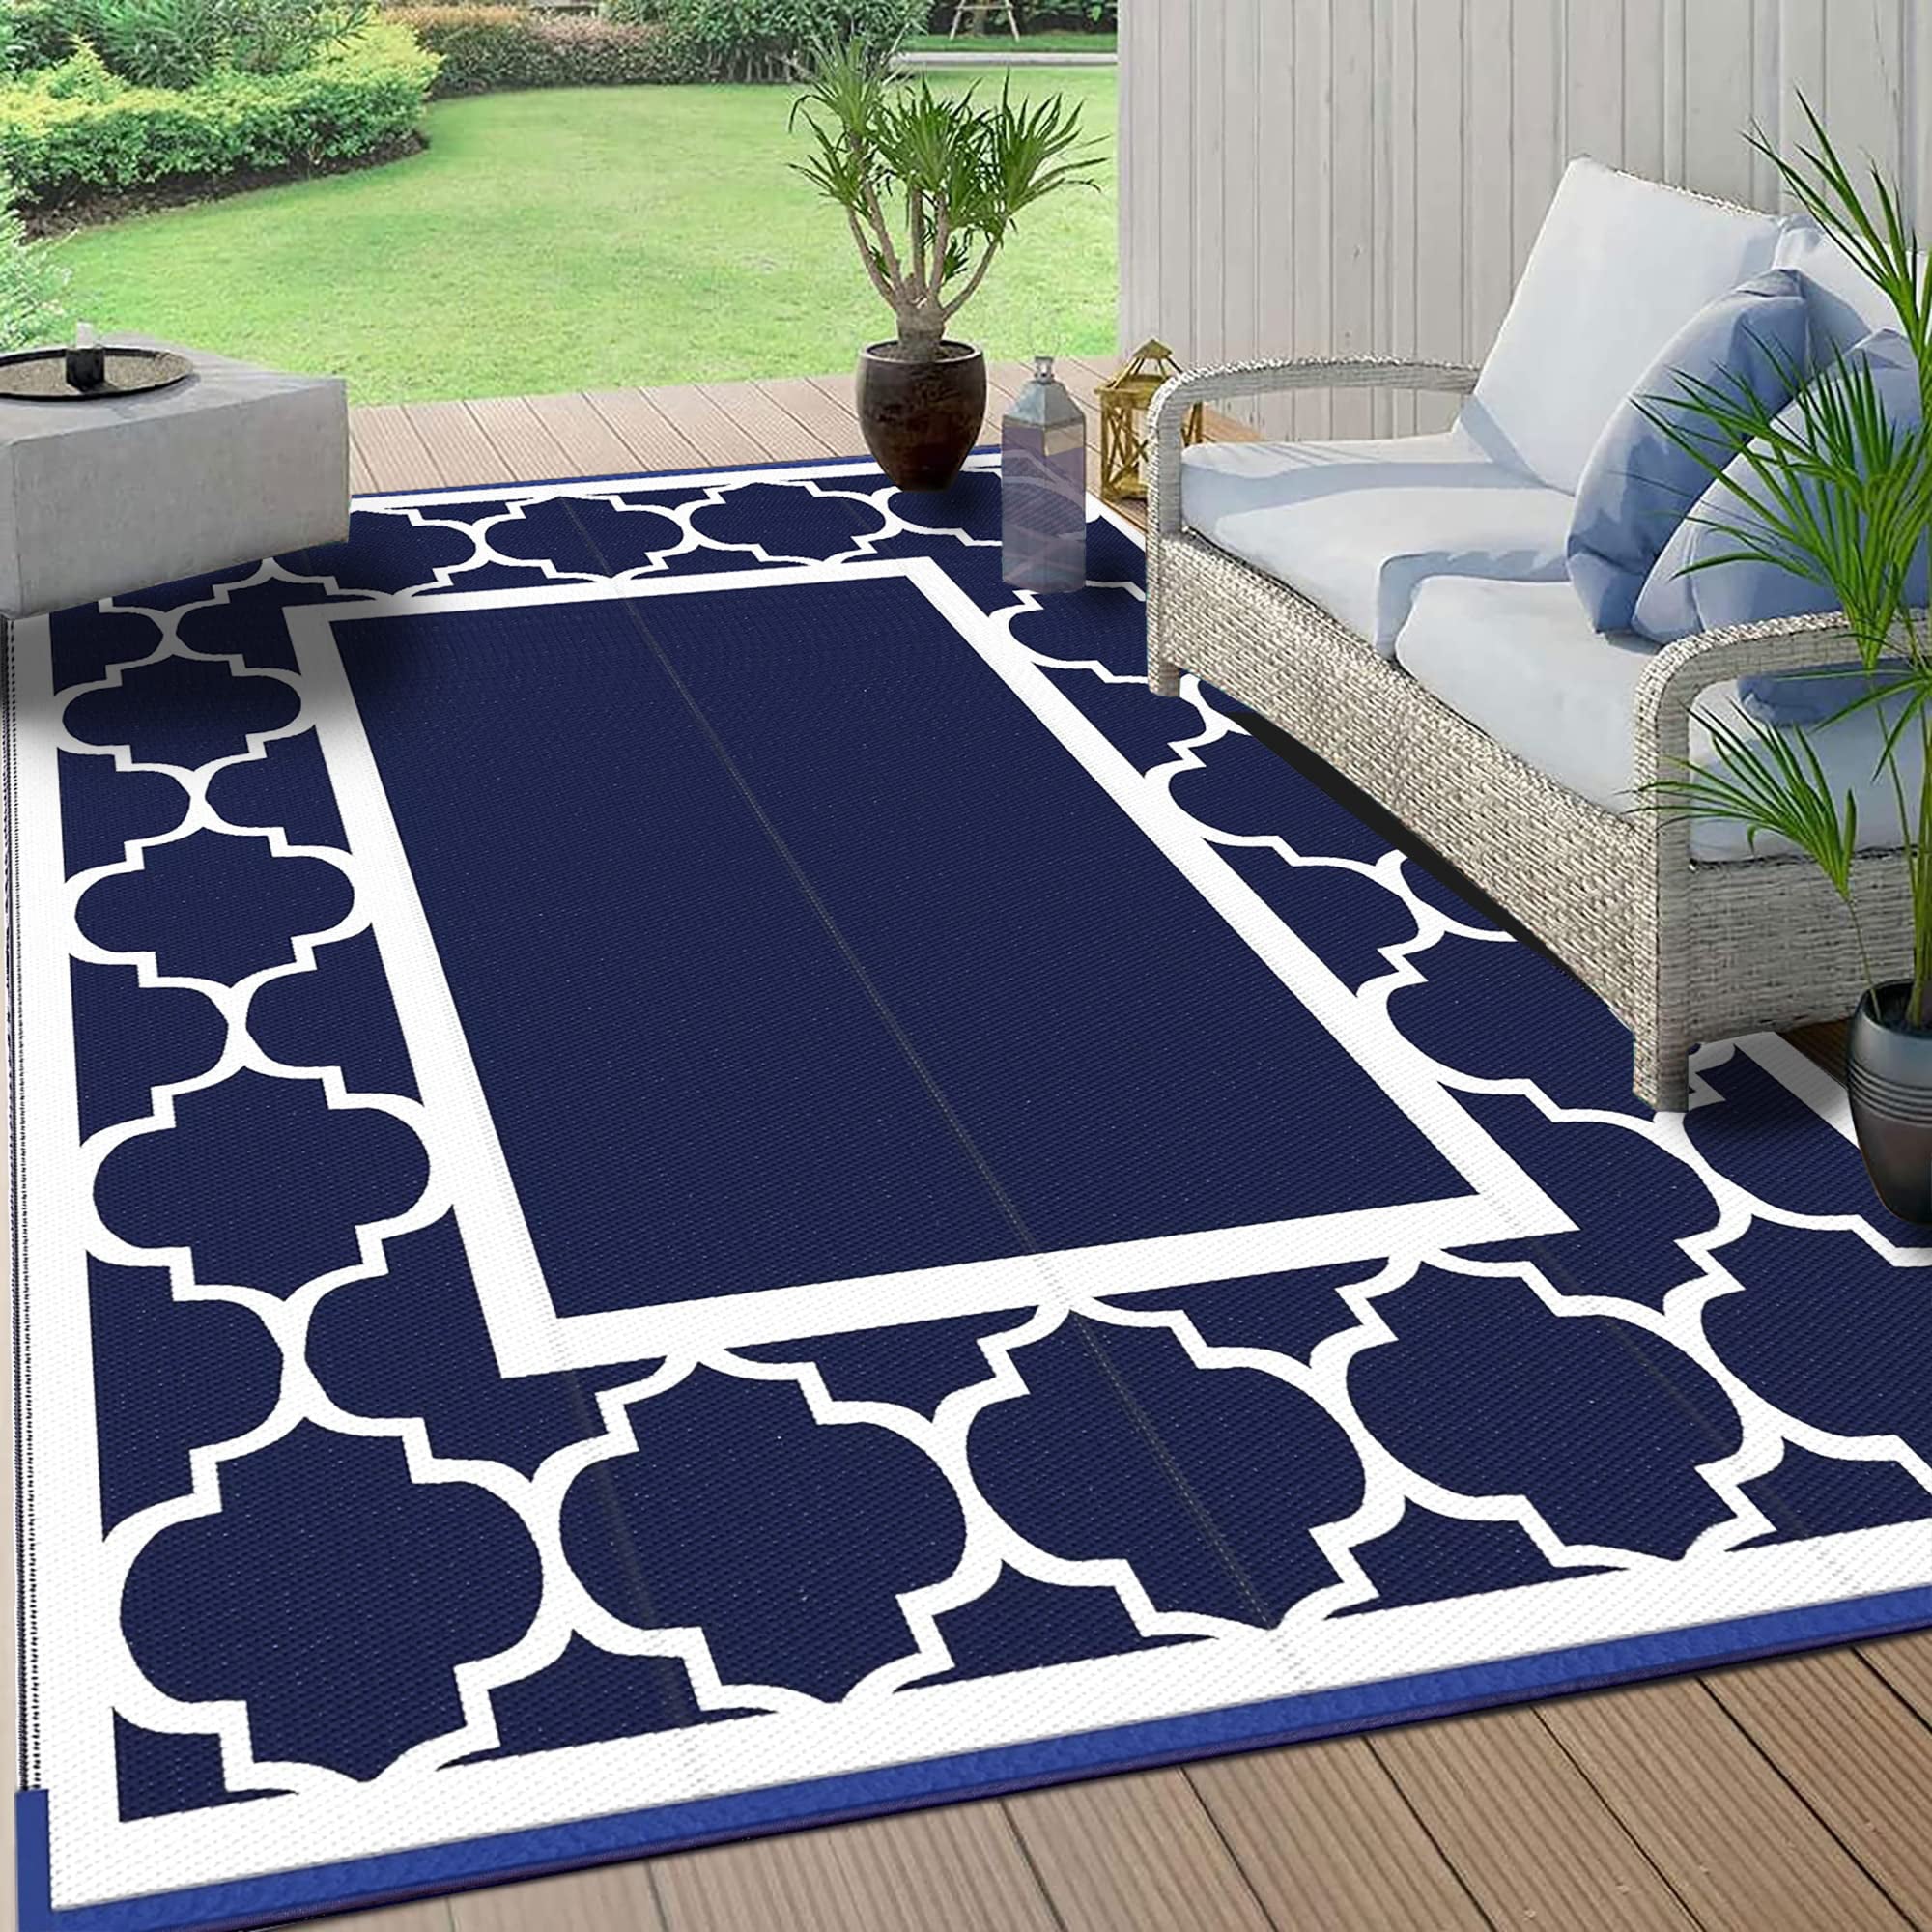 GENIMO Outdoor Rug 5' x 8' Waterproof for Patios Clearance, Reversible  Plastic Straw Camping Carpet, Large Area Rugs Mats for RV, Picnic,  Backyard